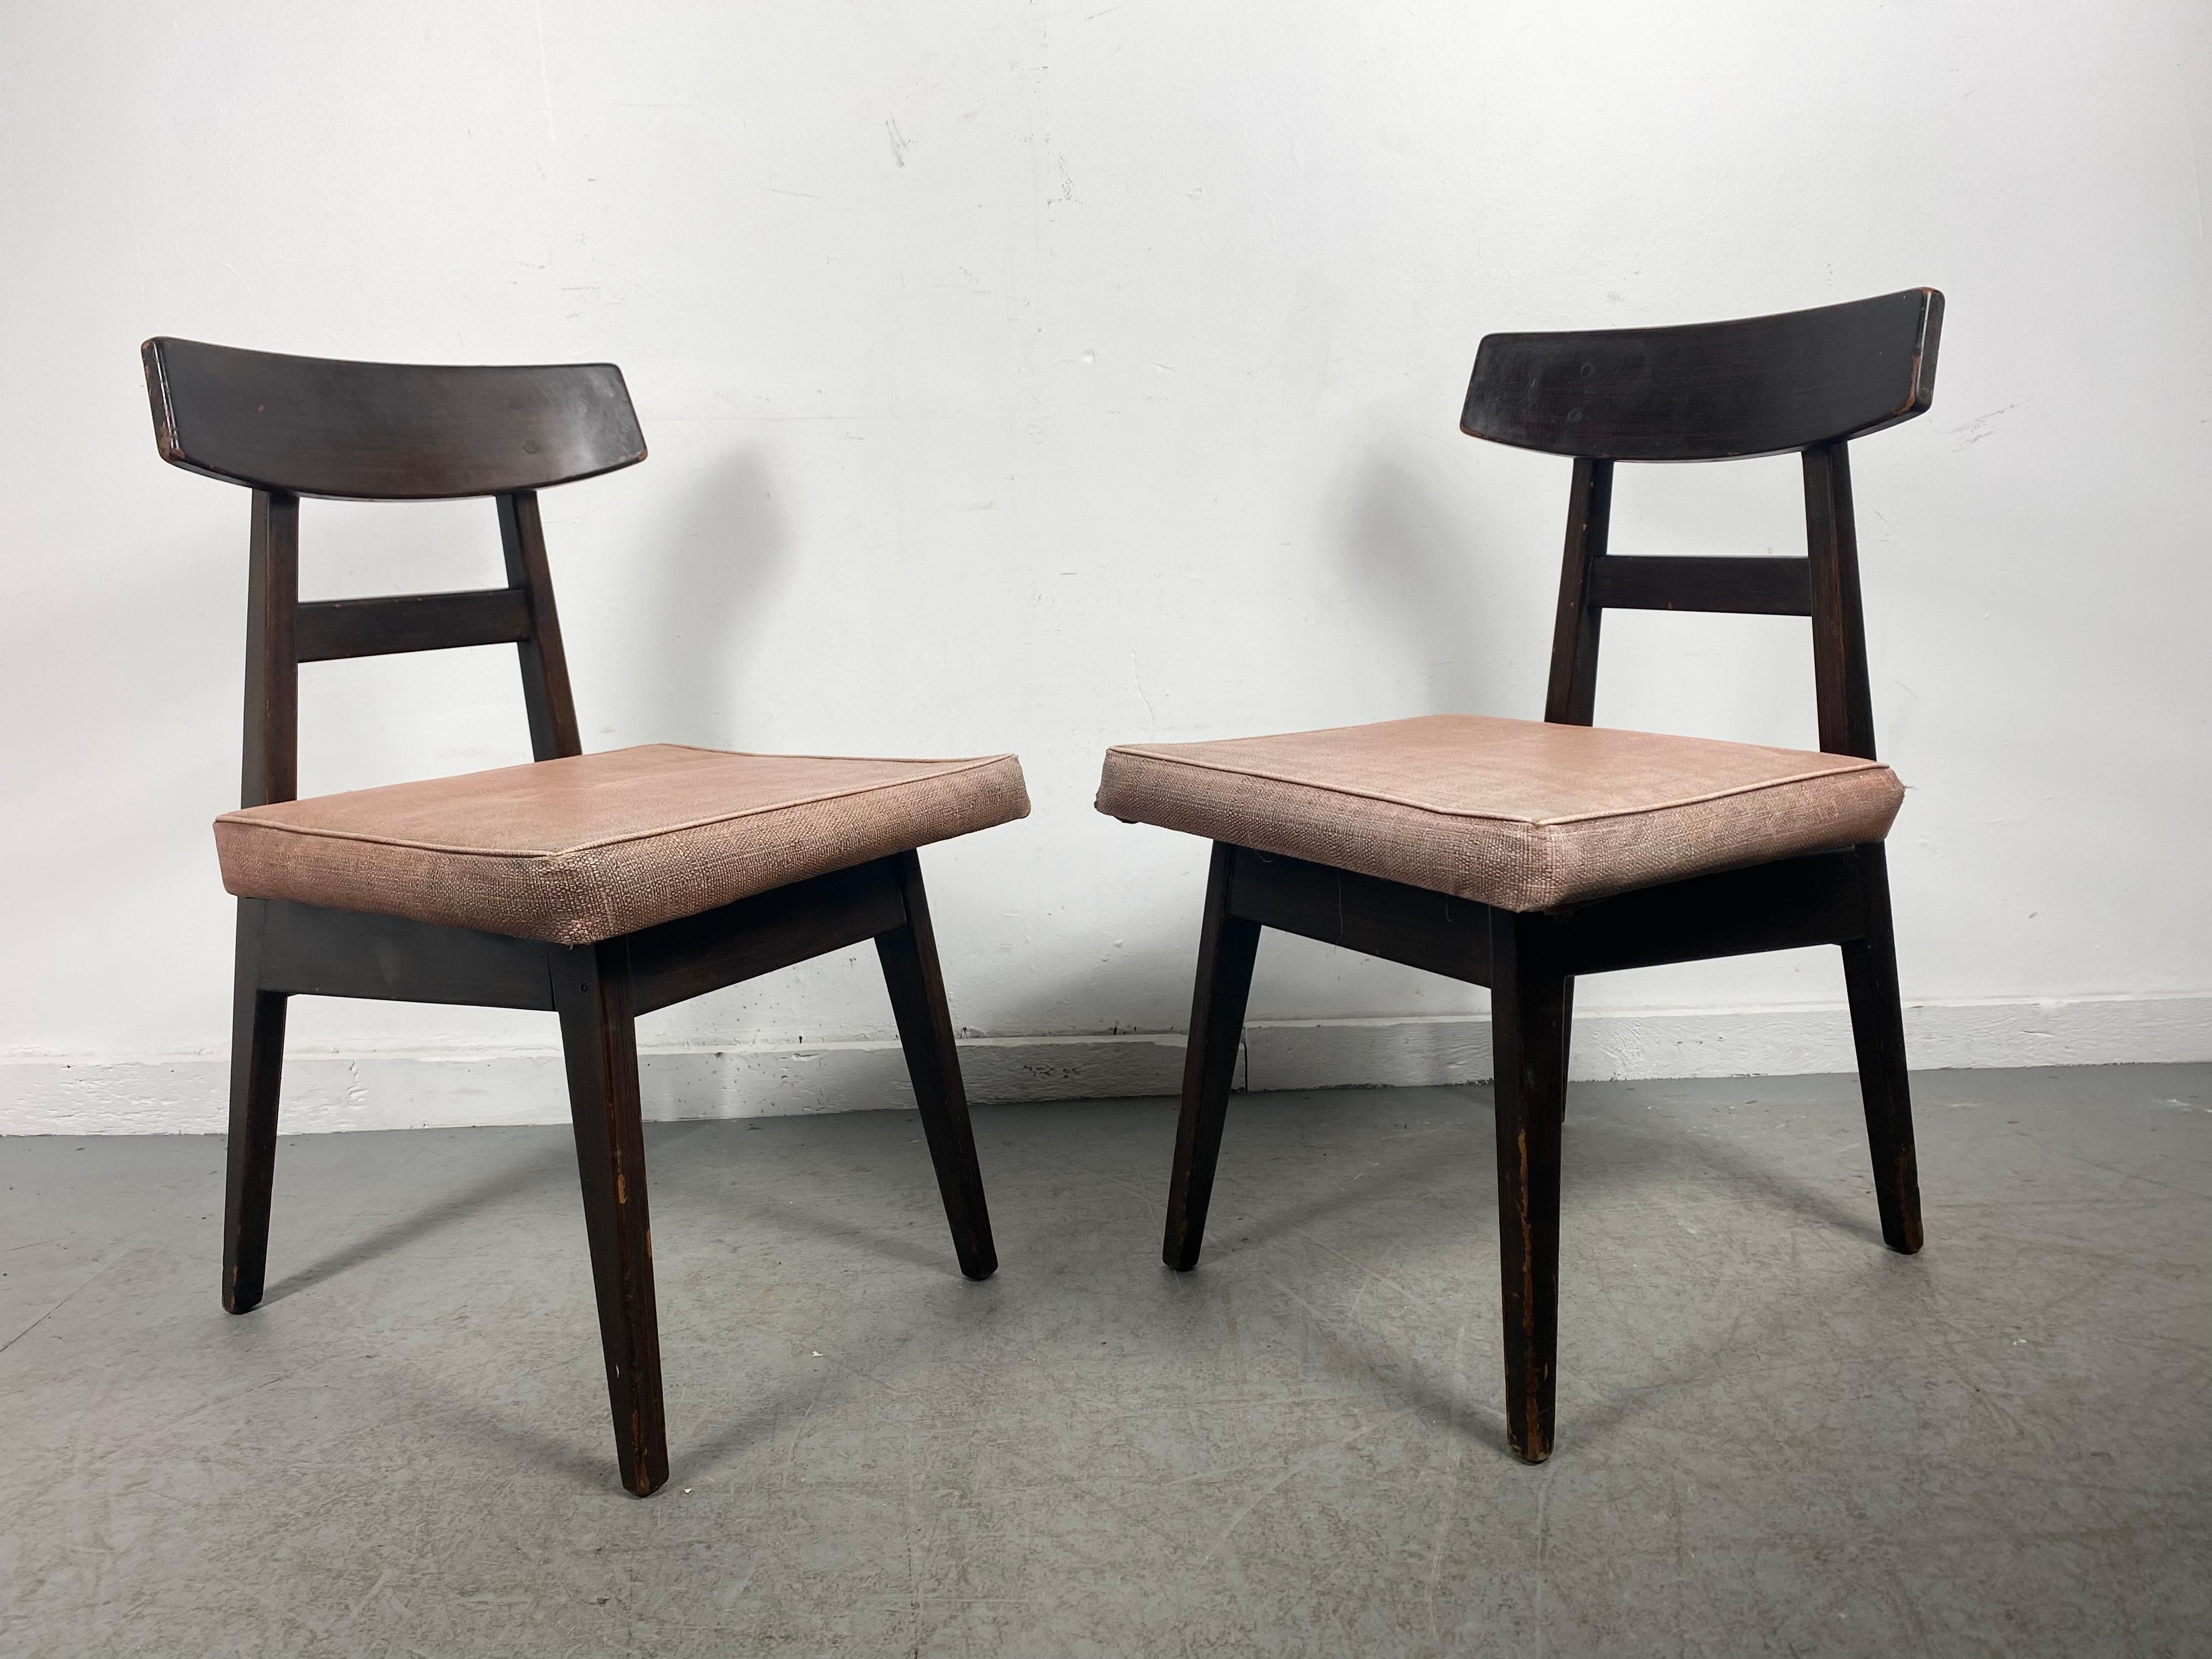 Extremely Rare Asian Inspired Modernist Side Chairs Designed by Jens Risom For Sale 2